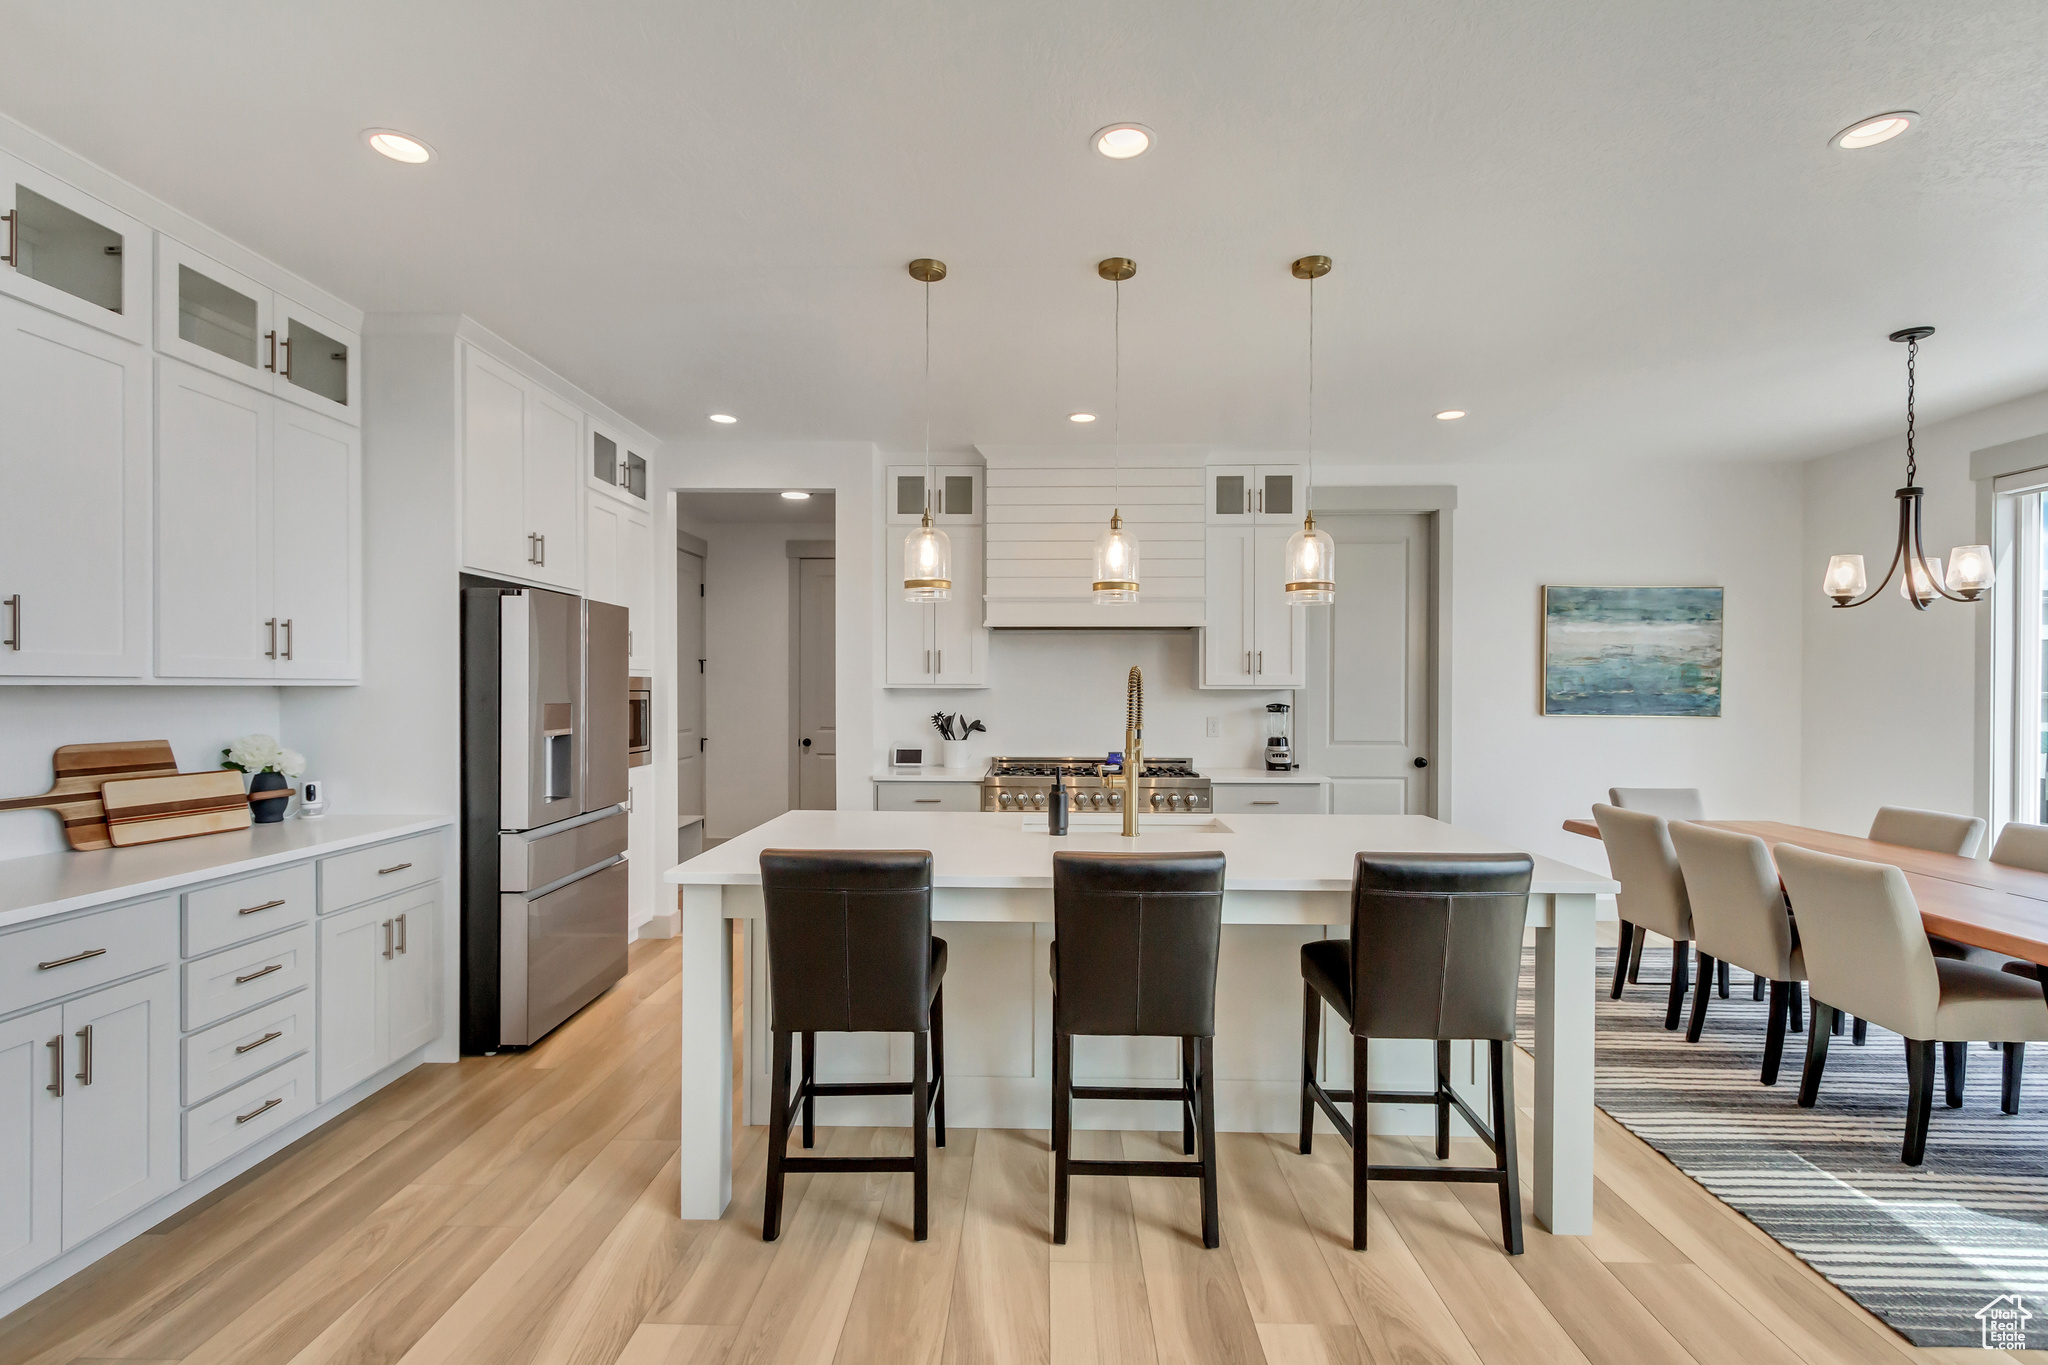 Kitchen featuring stainless steel fridge with ice dispenser, decorative light fixtures, a center island with sink, light hardwood / wood-style floors, and white cabinetry